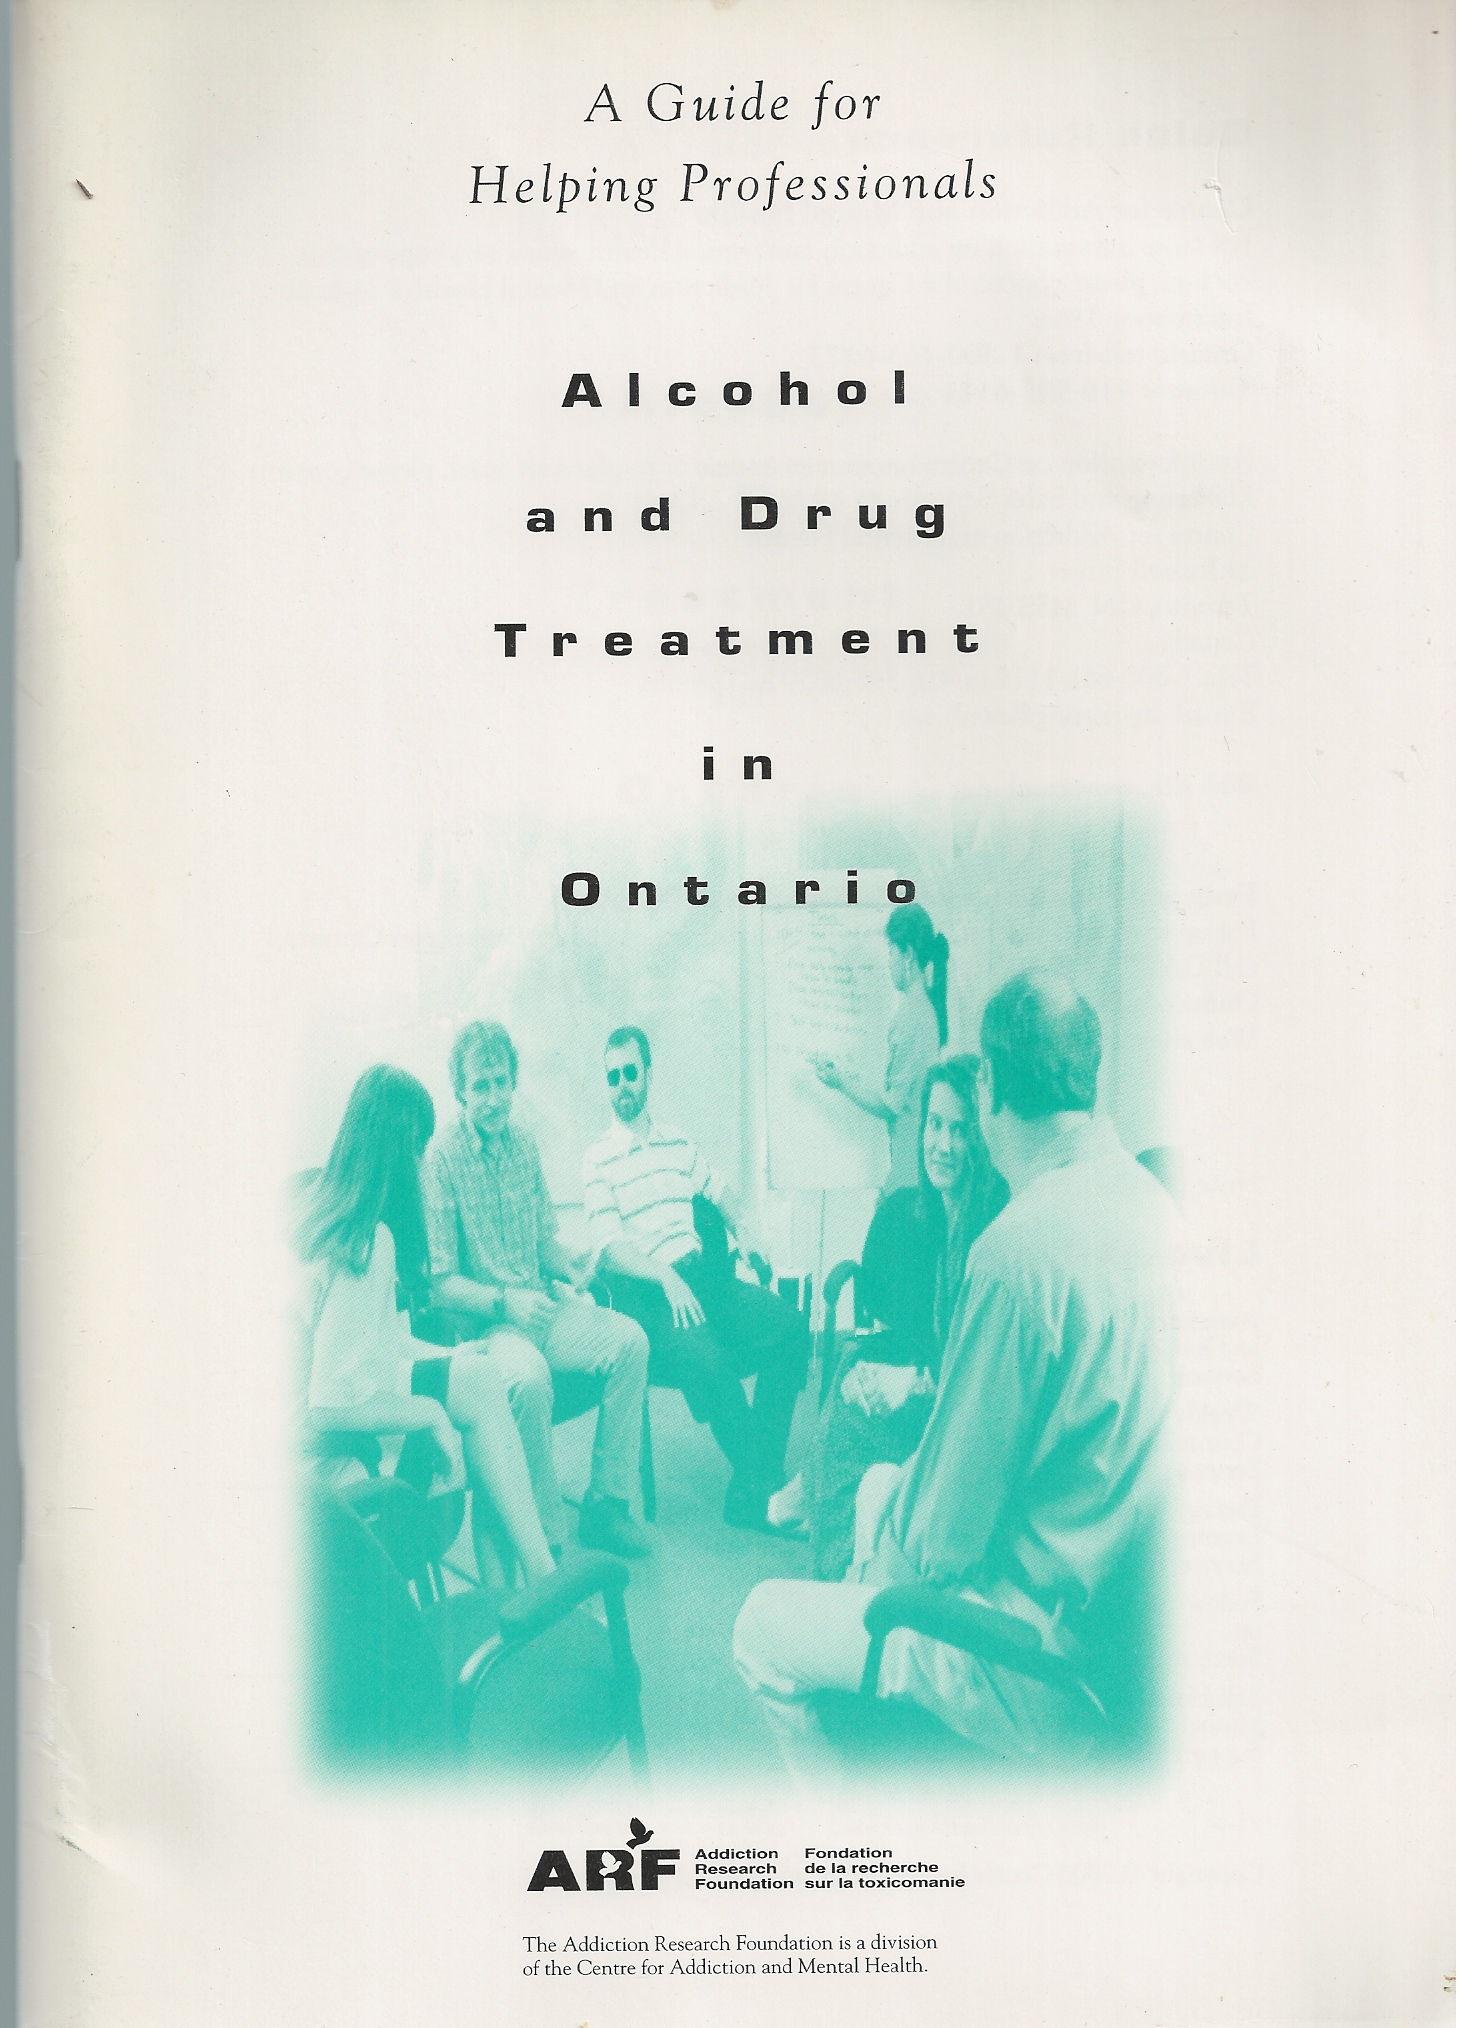 ADDICTION RESEARCH FOUNDATION - Alcohol and Drug Treatment in Ontario